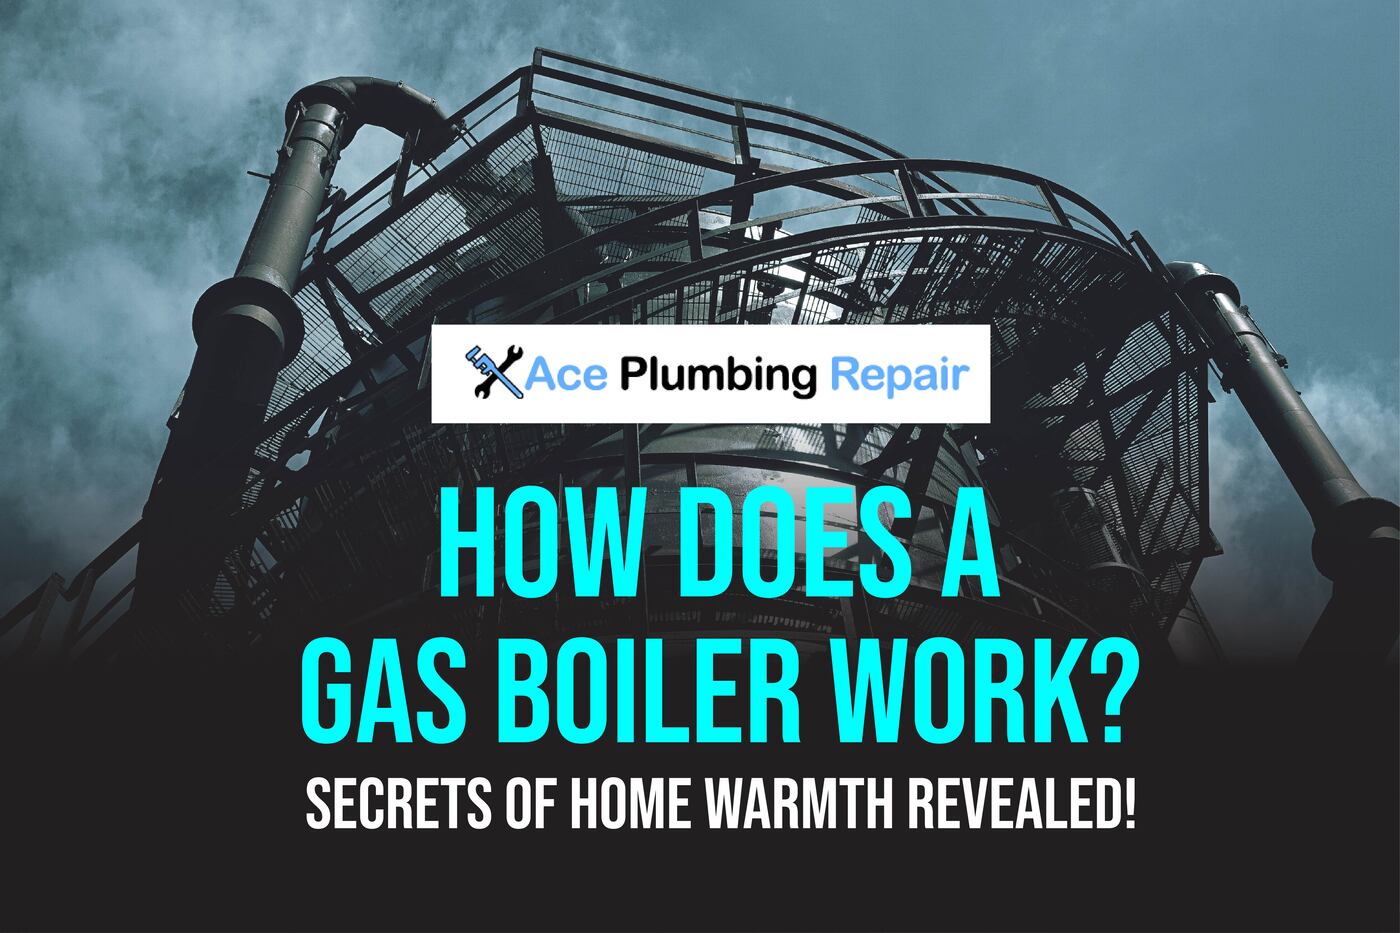 How does a gas boiler work?